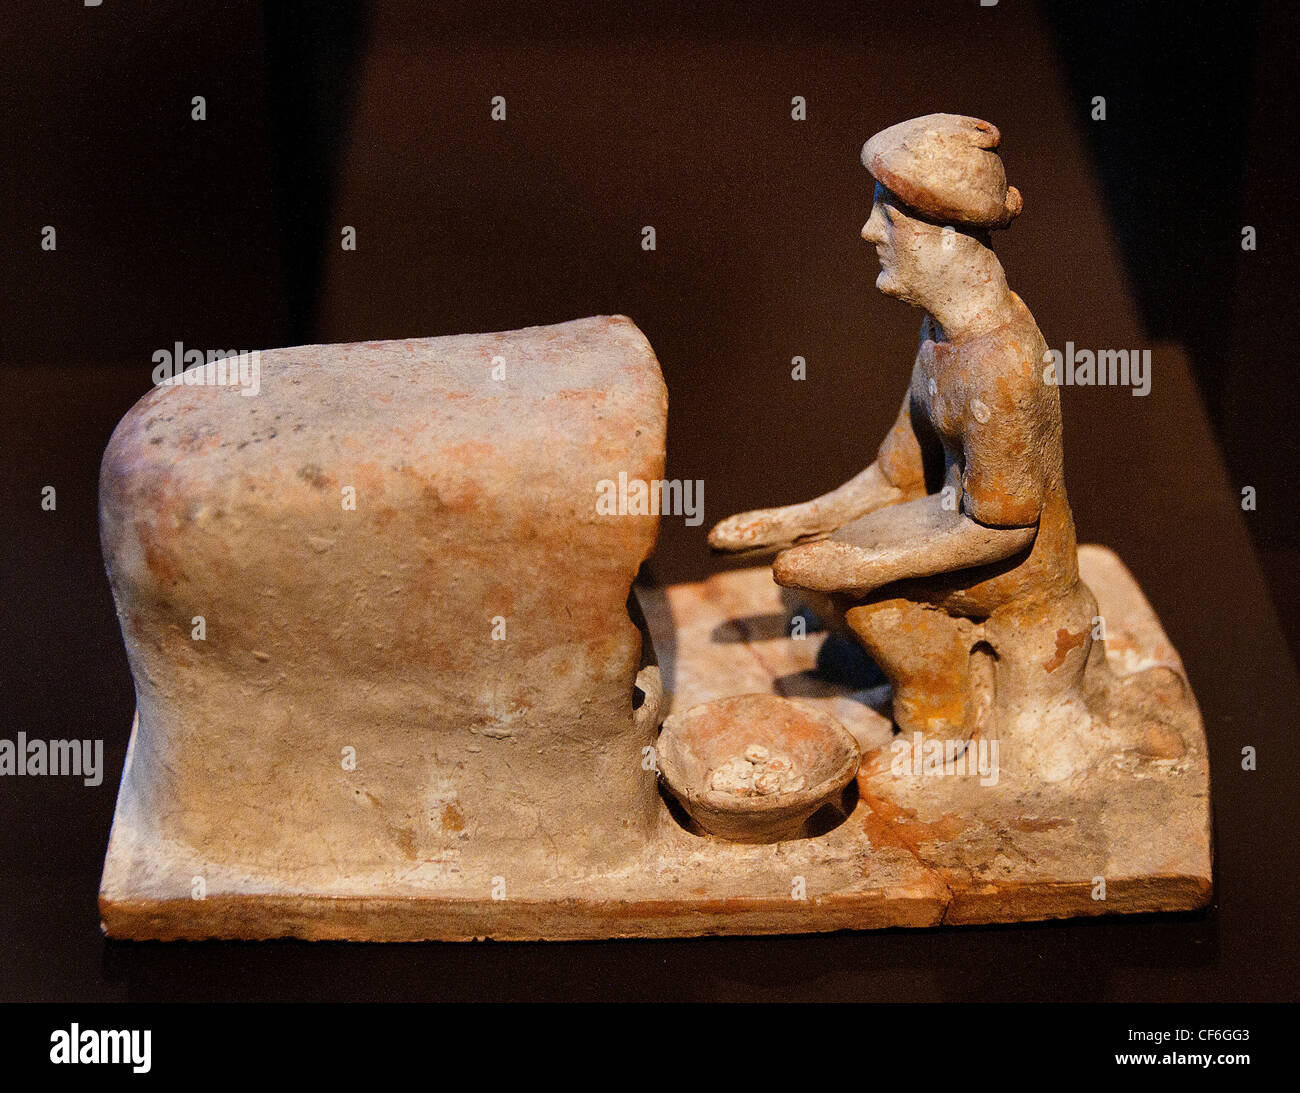 Cook in oven 5 century BC  Tanagra  ancient Greek terracotta figurine Boeotian town of Tanagra Greece Stock Photo